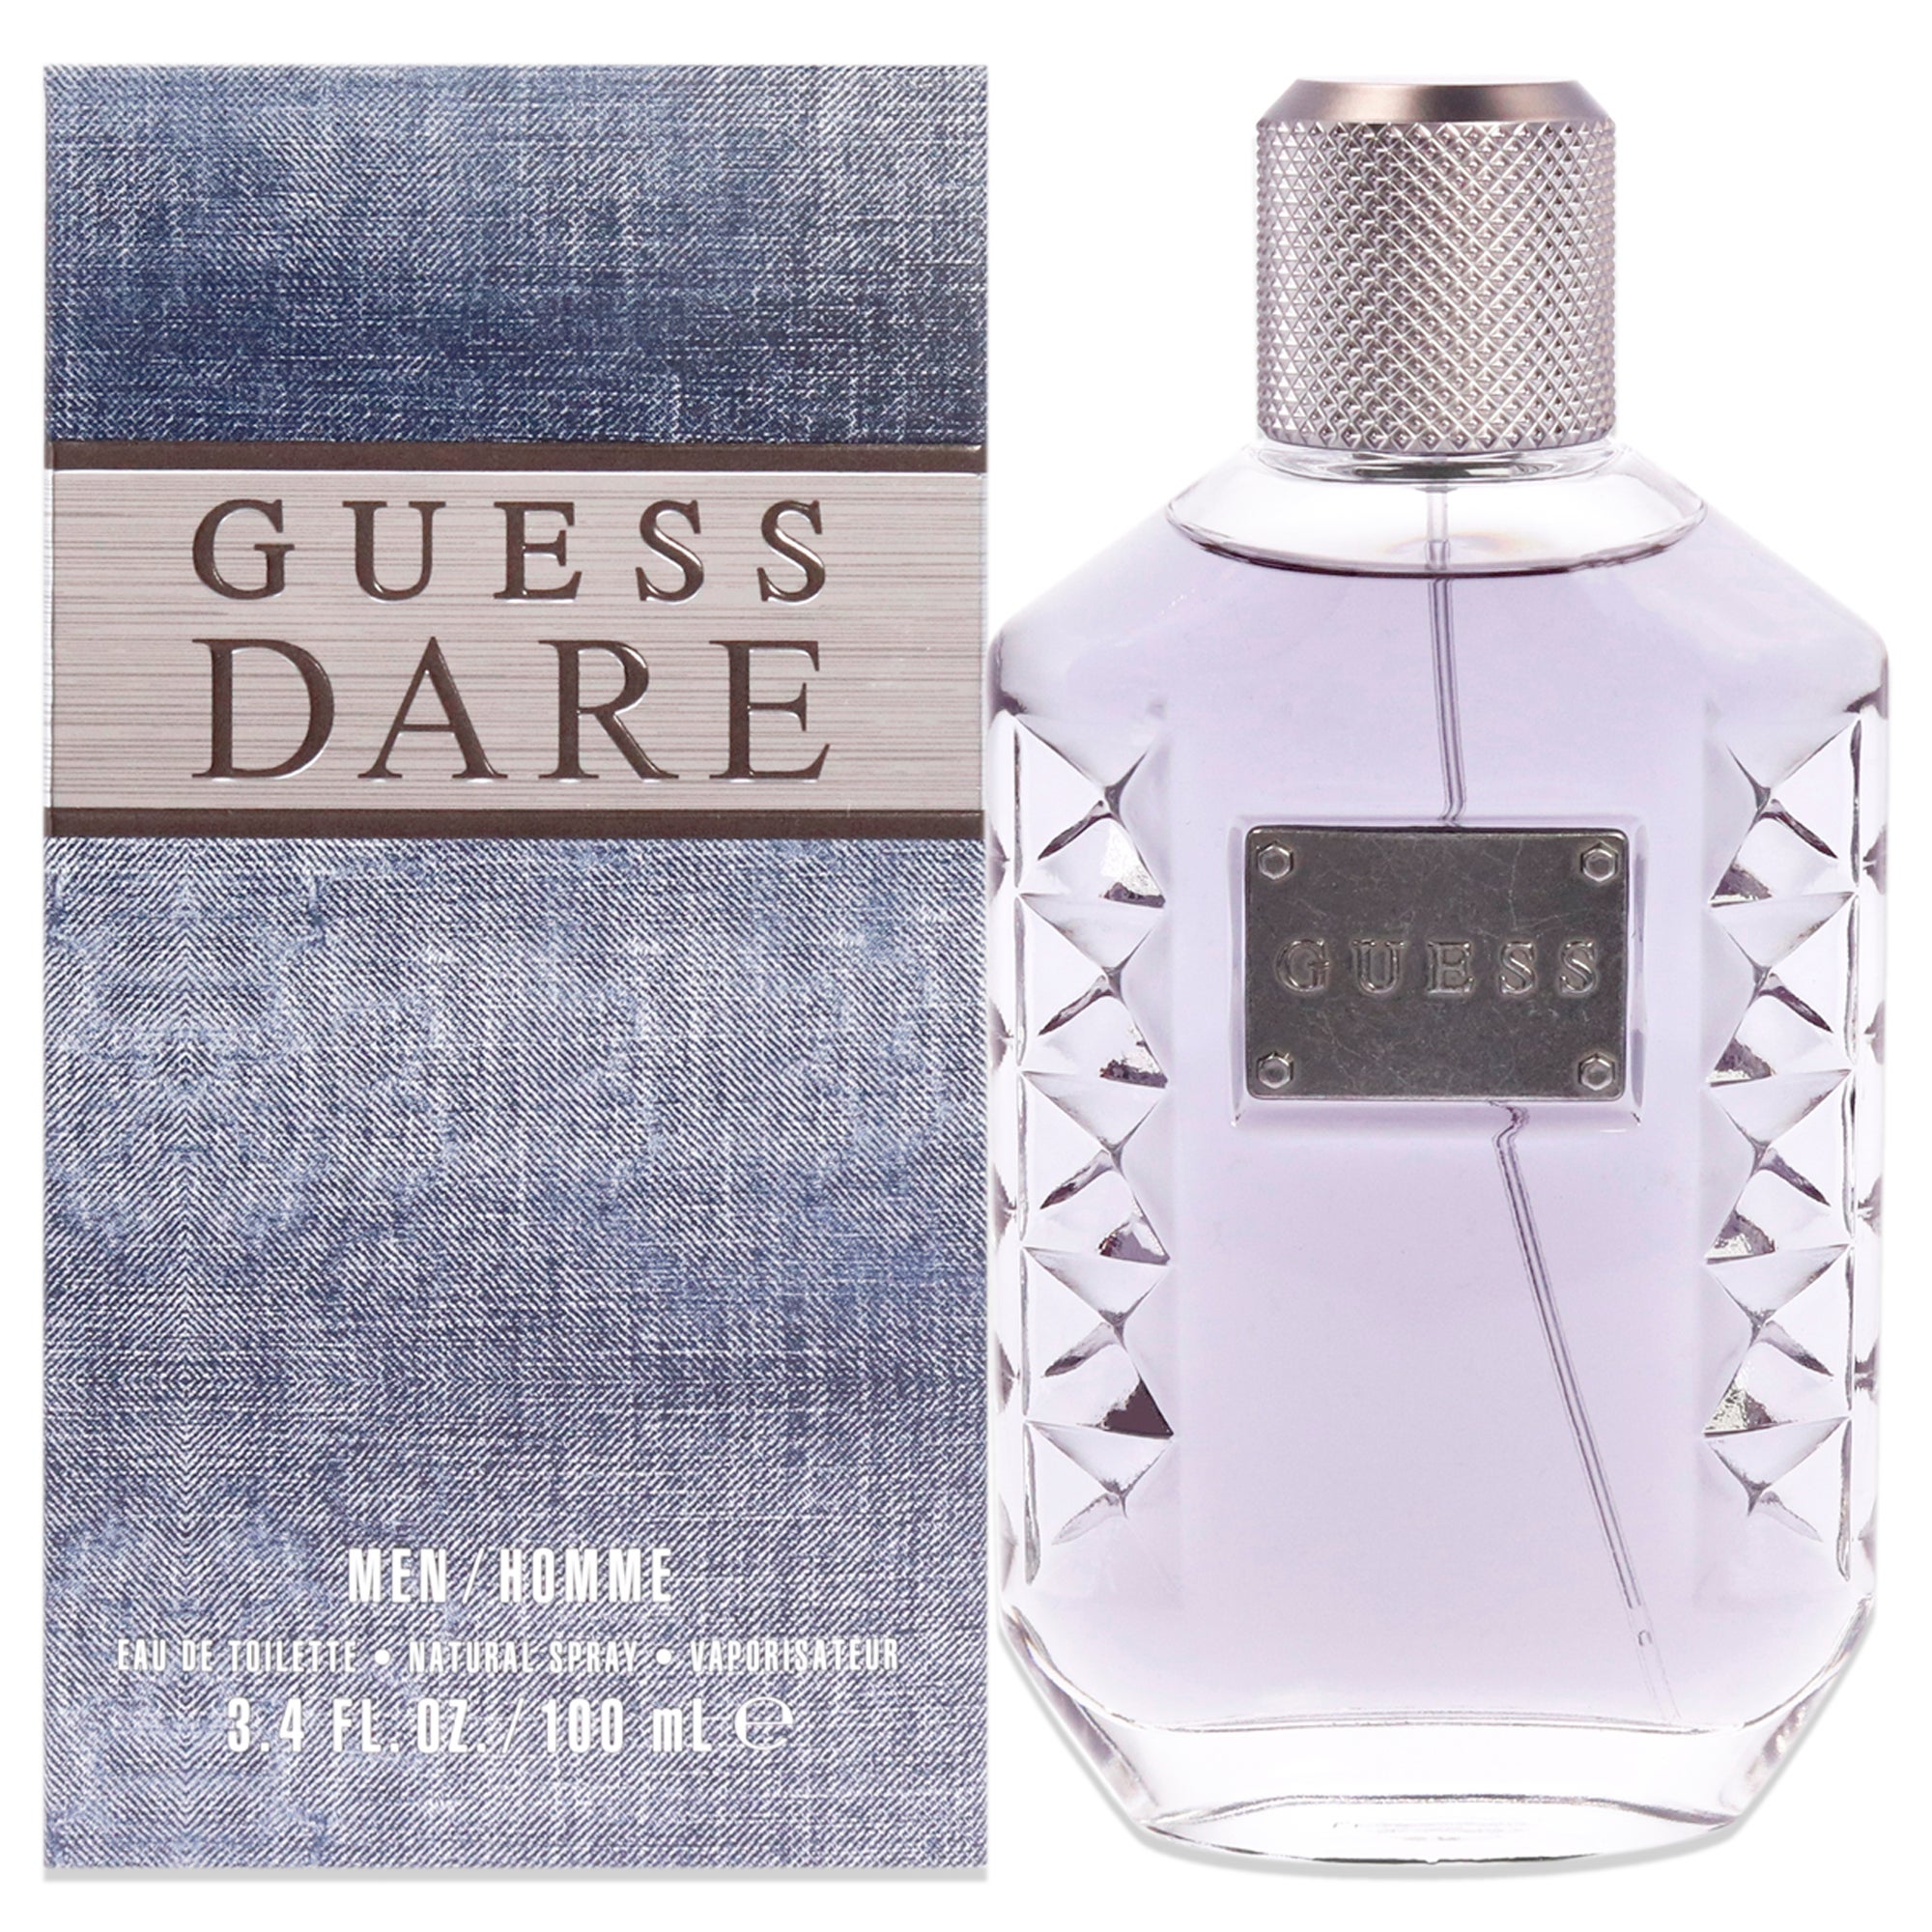 Guess Dare by Guess for Men - 3.4 oz EDT Spray